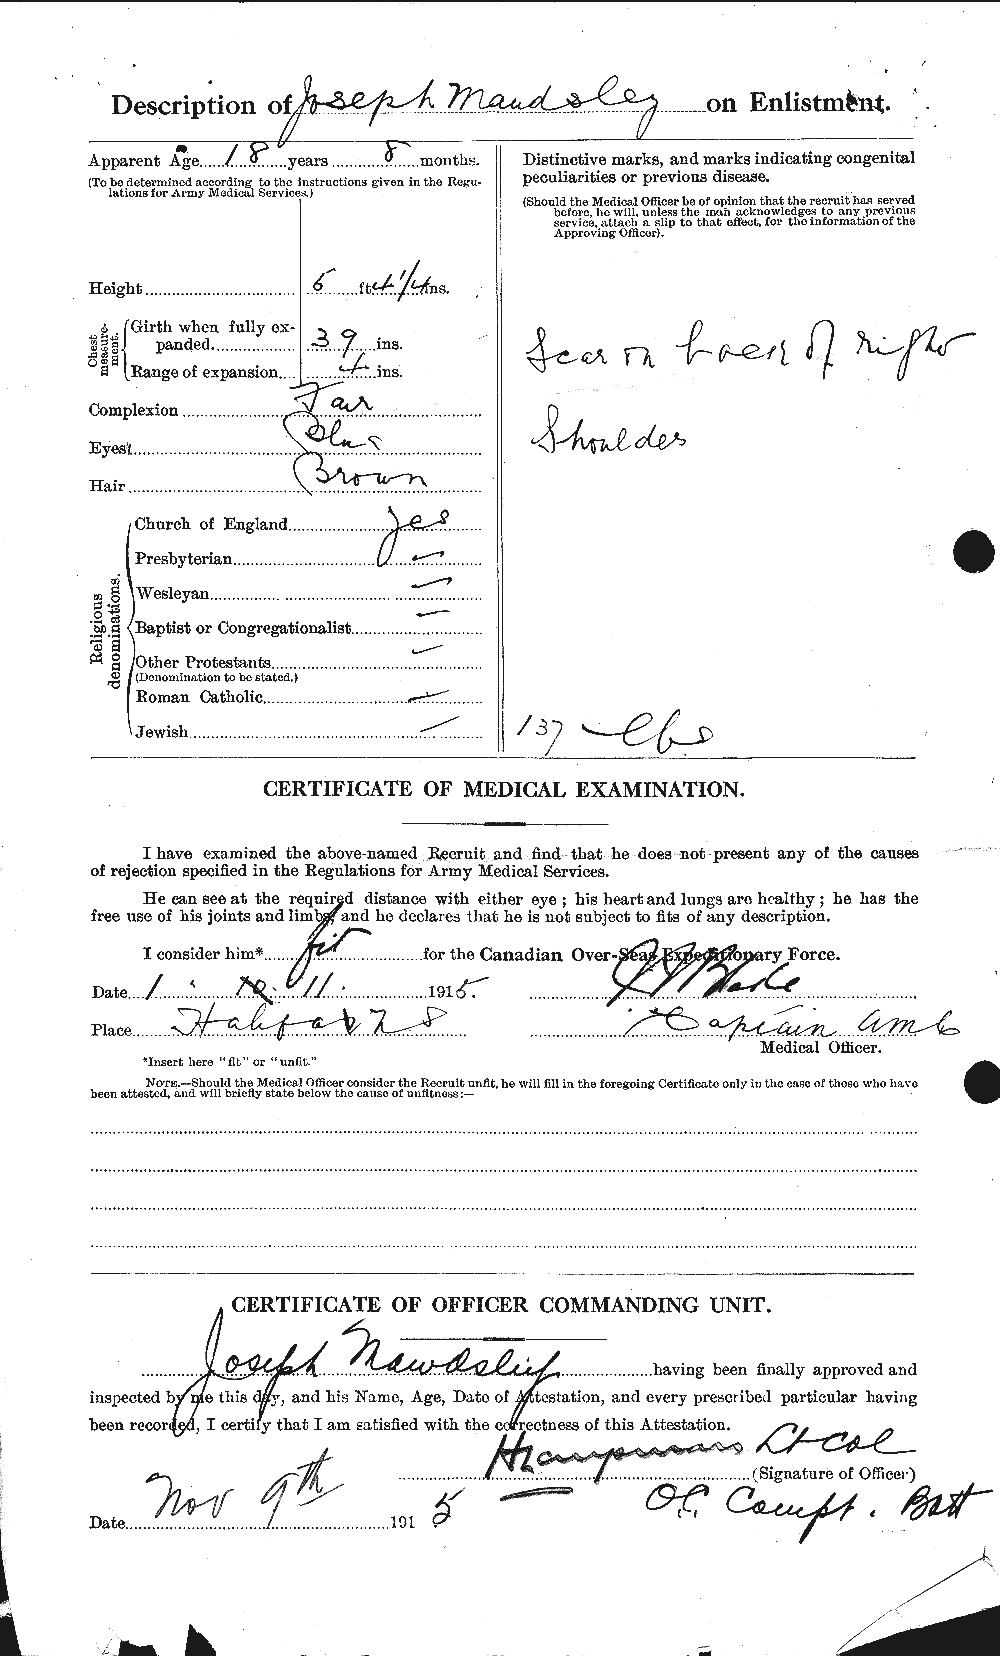 Personnel Records of the First World War - CEF 487956b